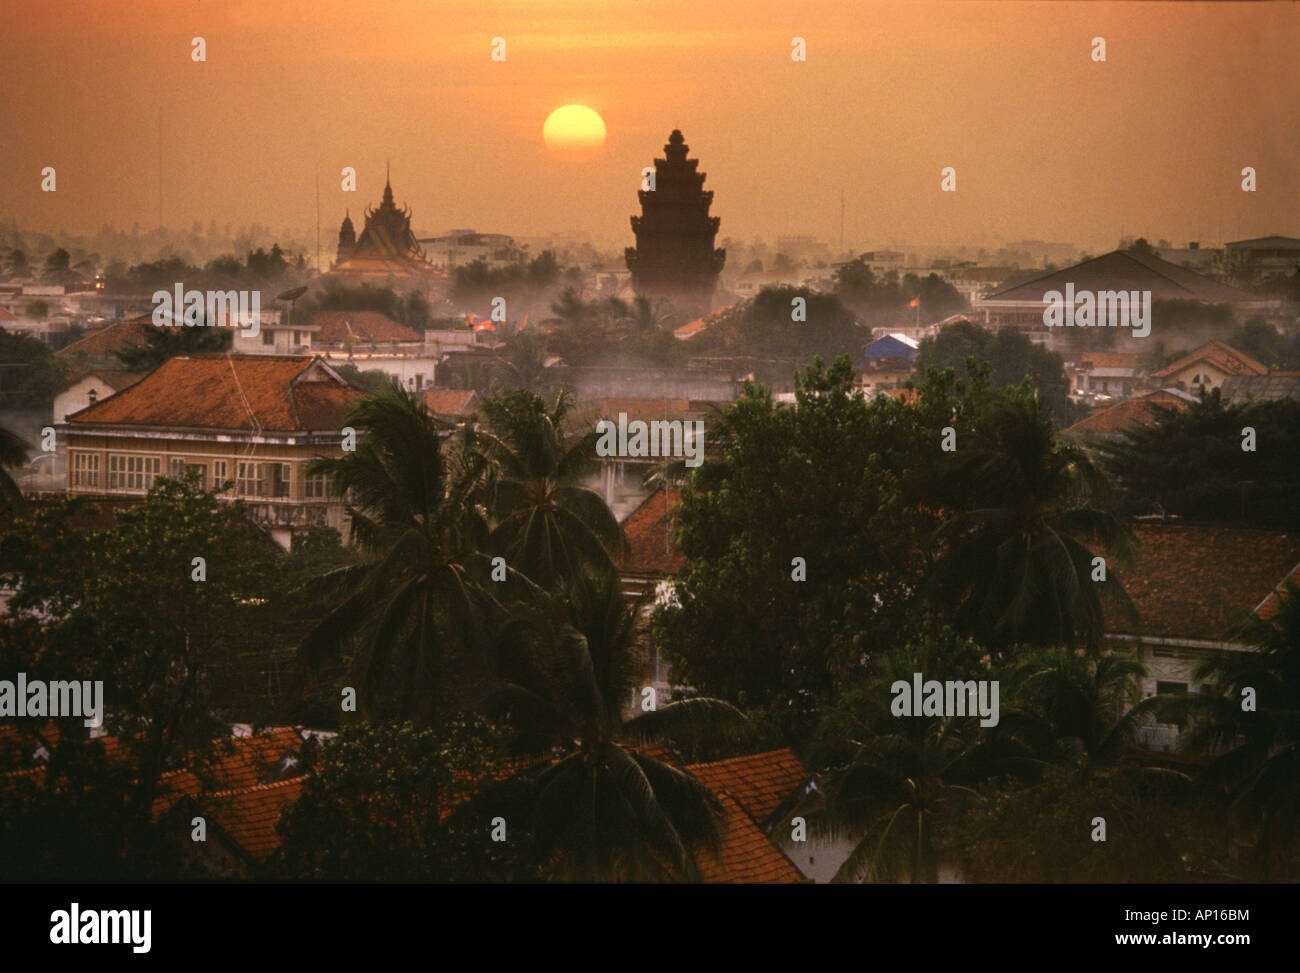 Phnom Penh at sunset with Independence Monument, Phnom Penh, Cambodia Stock Photo